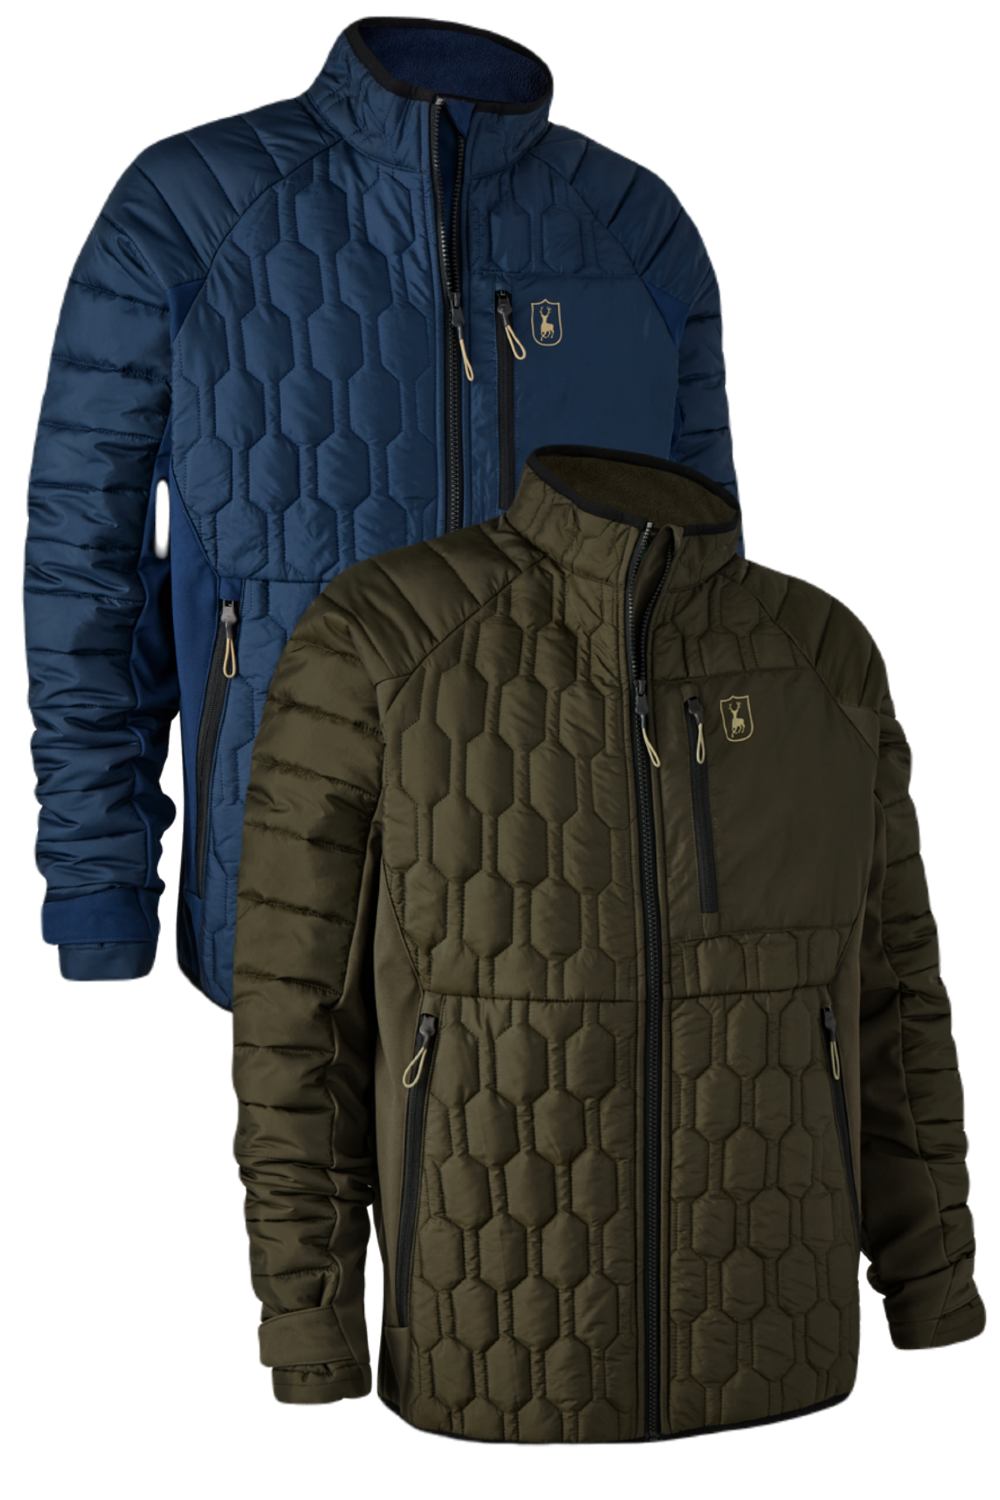 Deerhunter Mossdale Quilted Jacket In Dress Blue, Forest Green